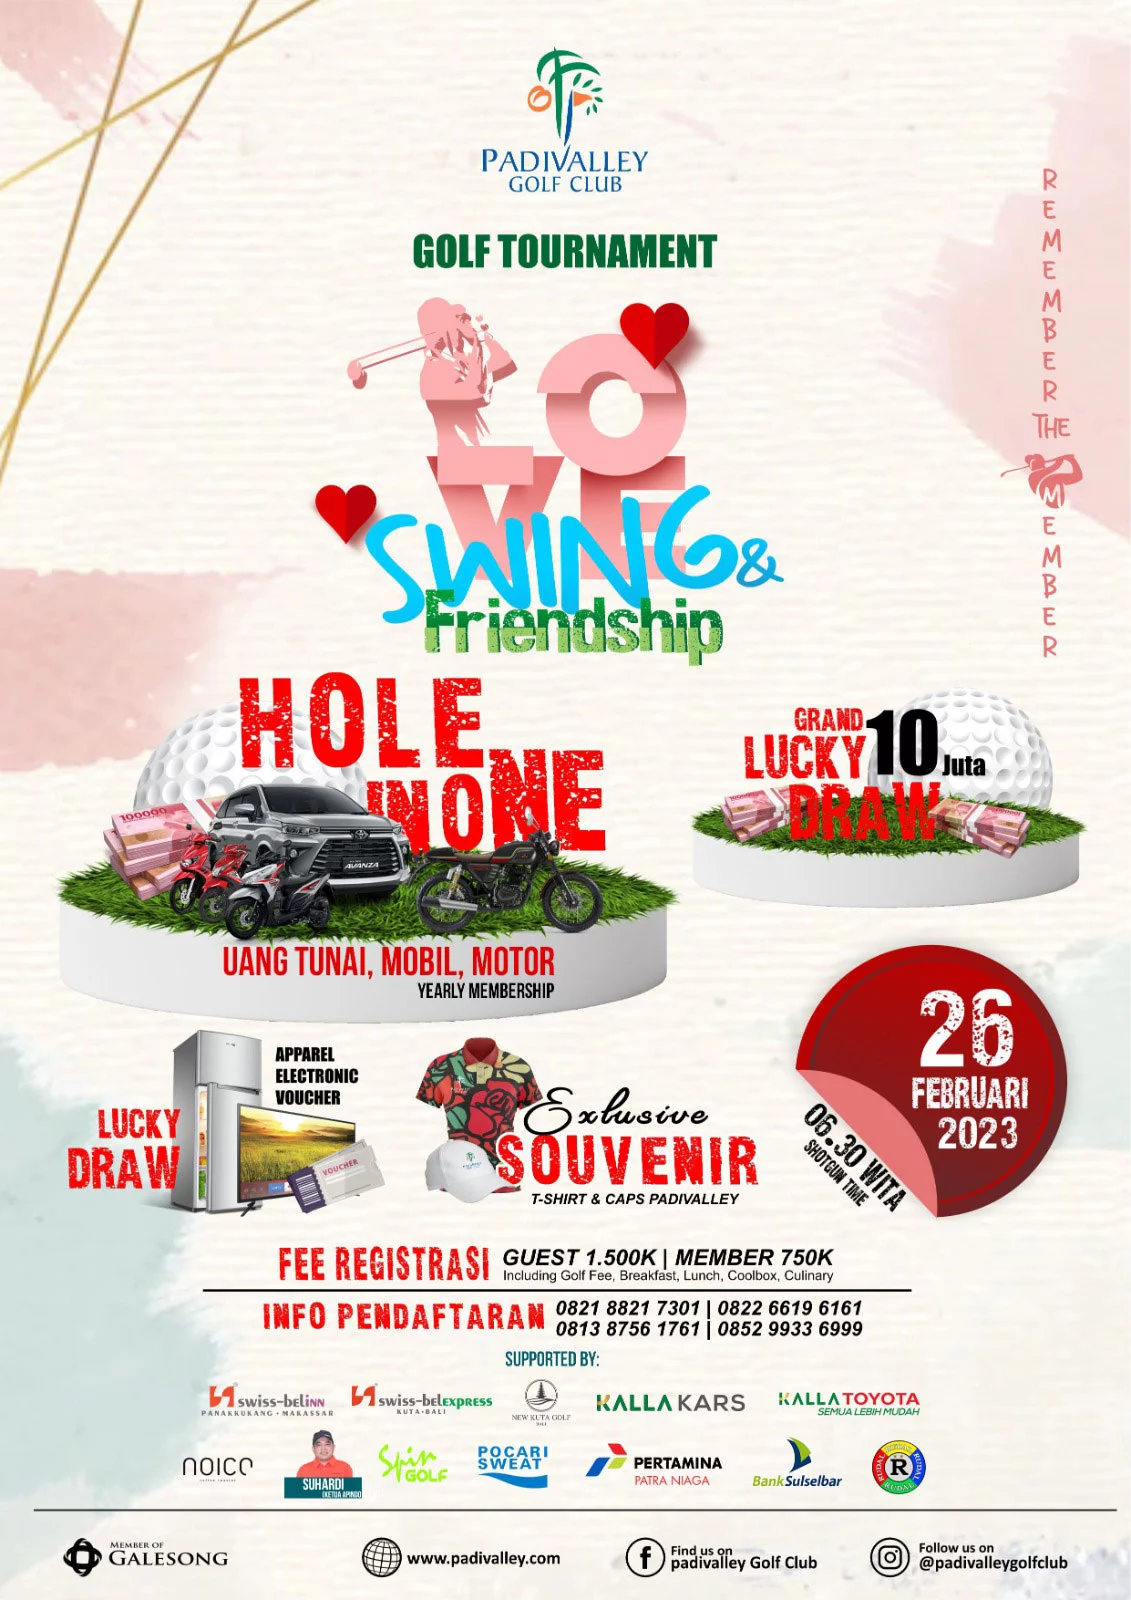 Flyer padivalley golf club turnament love swing and friendship